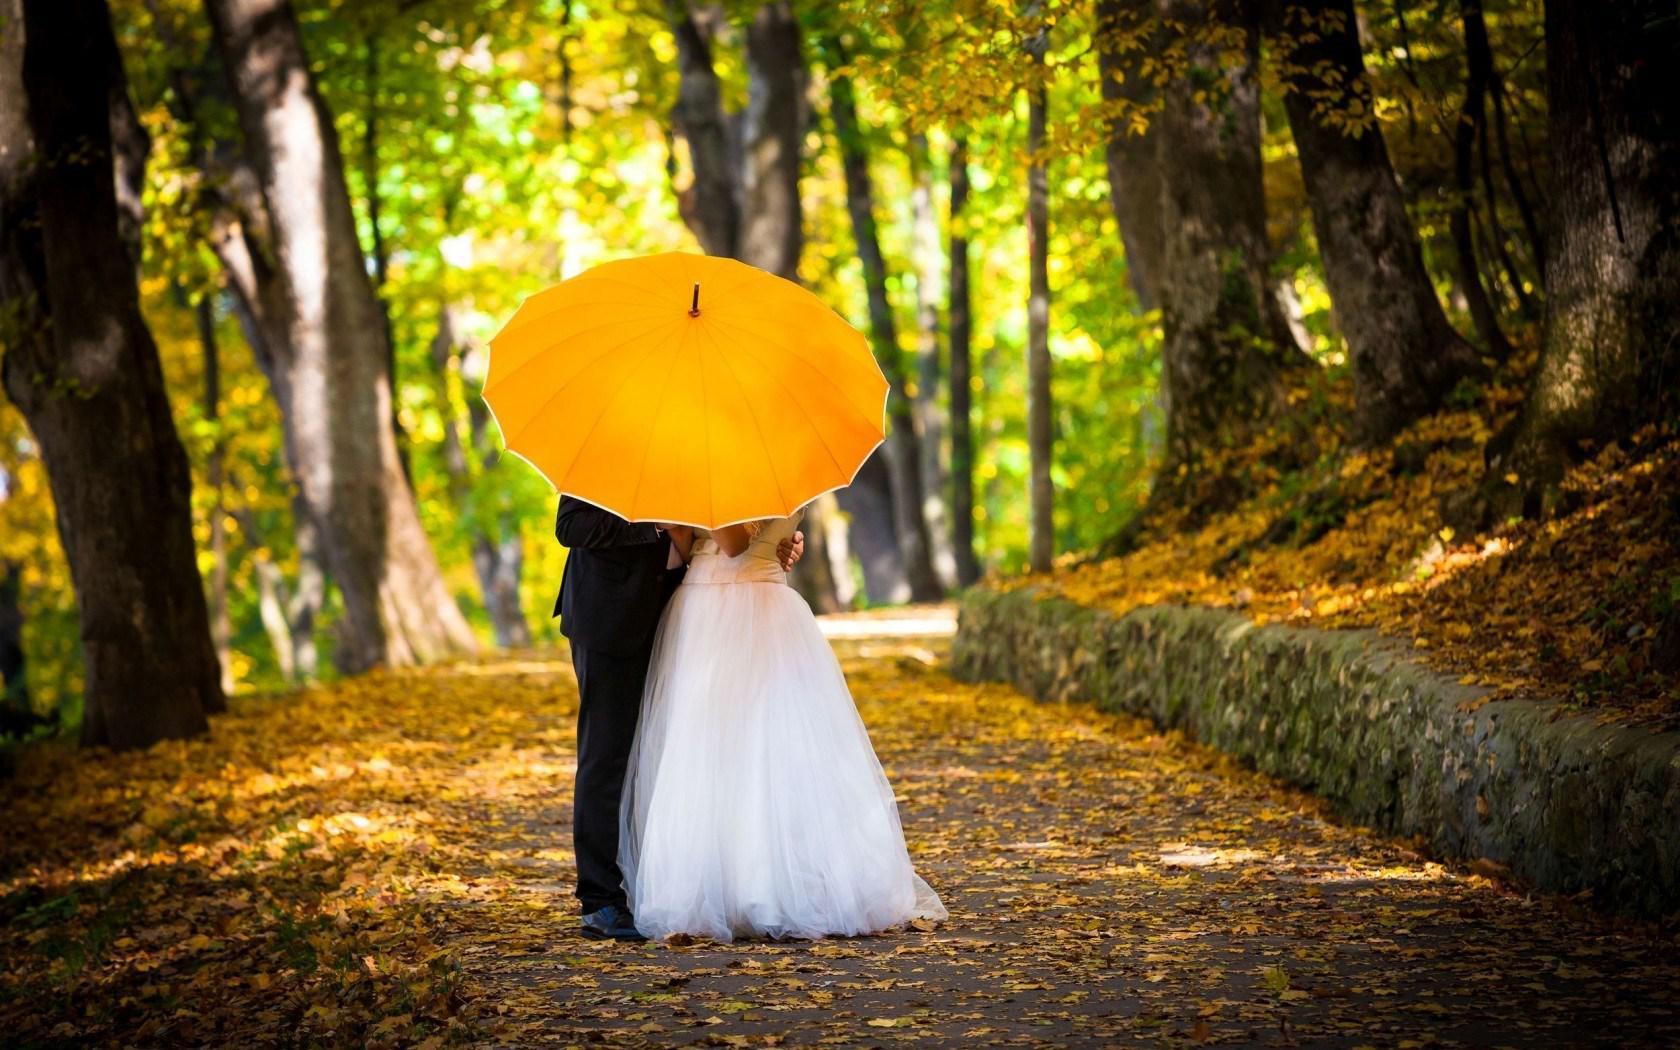 Married Couple Kissing In Umbrella - Hd Images Marriage Couple - HD Wallpaper 